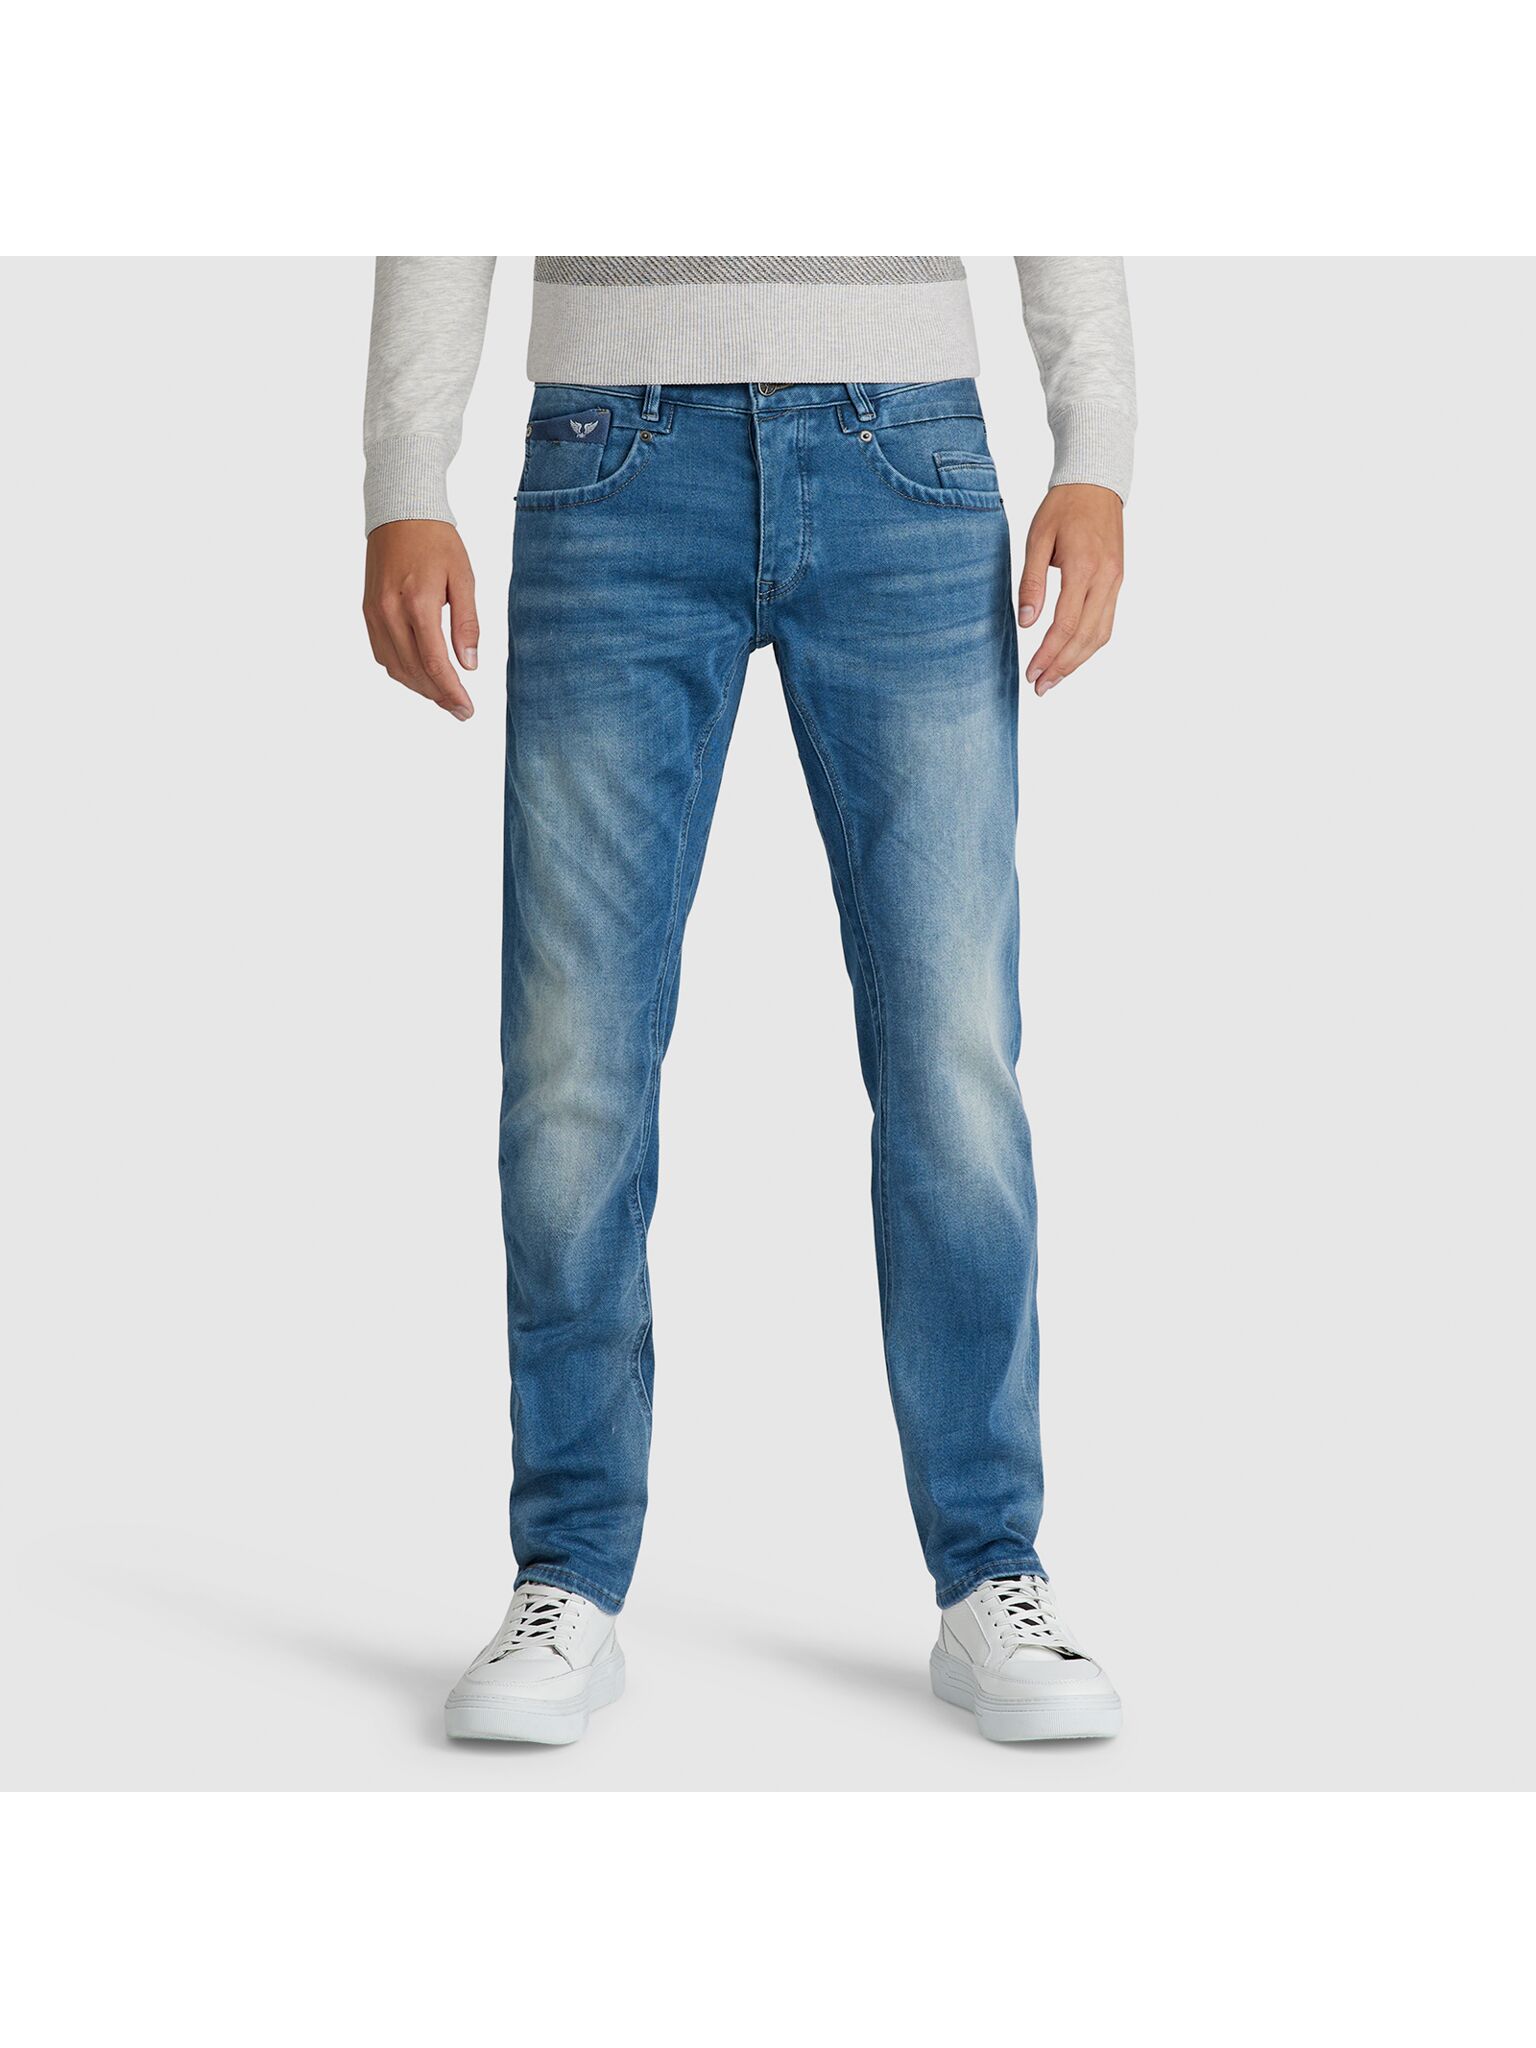 COMMANDER 3.0 JEANS PME Legend-Hose im Relaxed Fit